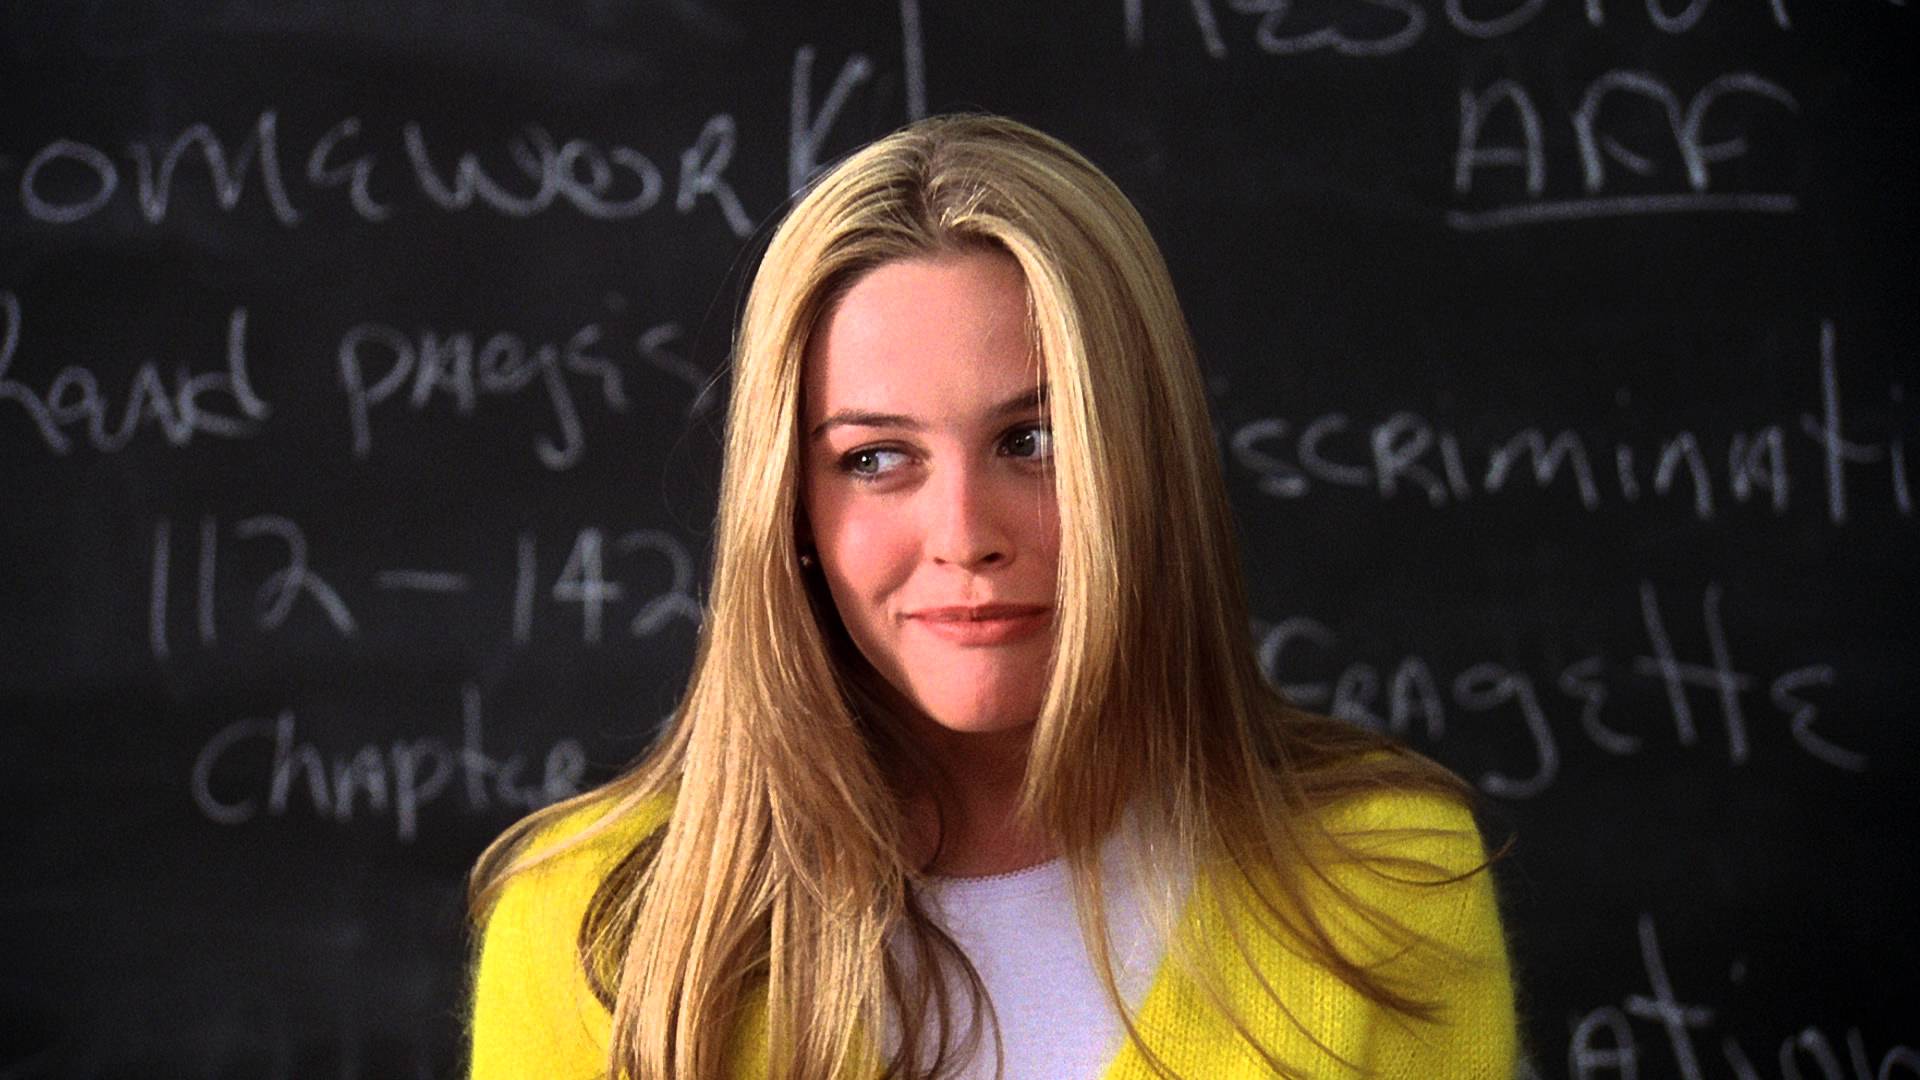 10 Facts About 'Clueless' That Will Make You Say 